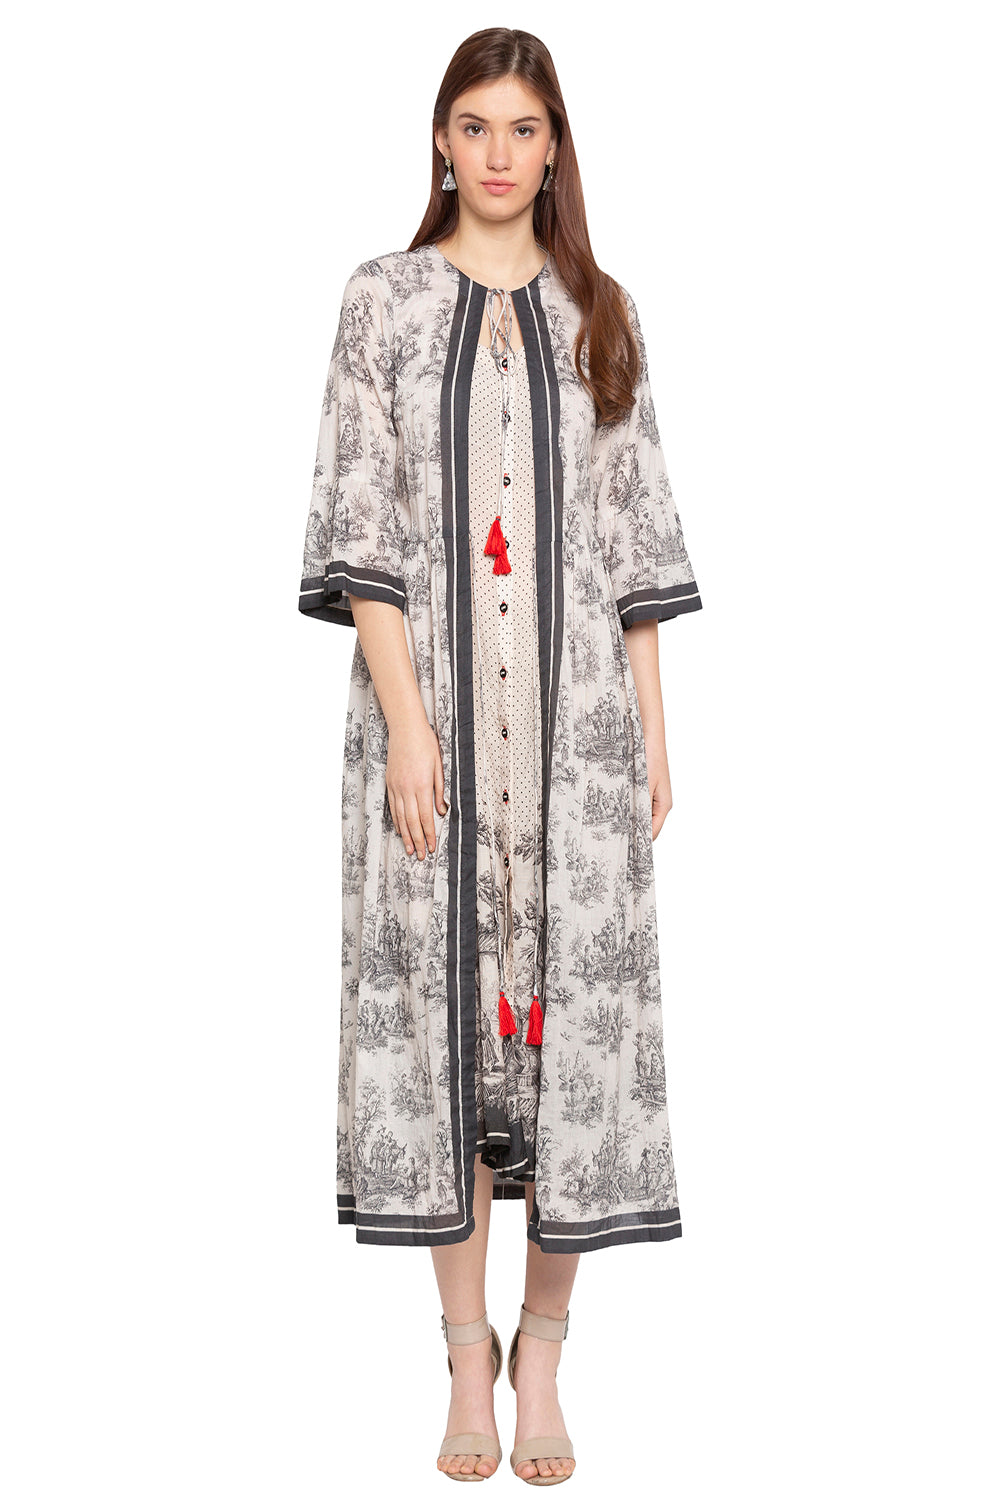 French Toile Printed Sleevesless Dress With Jacket